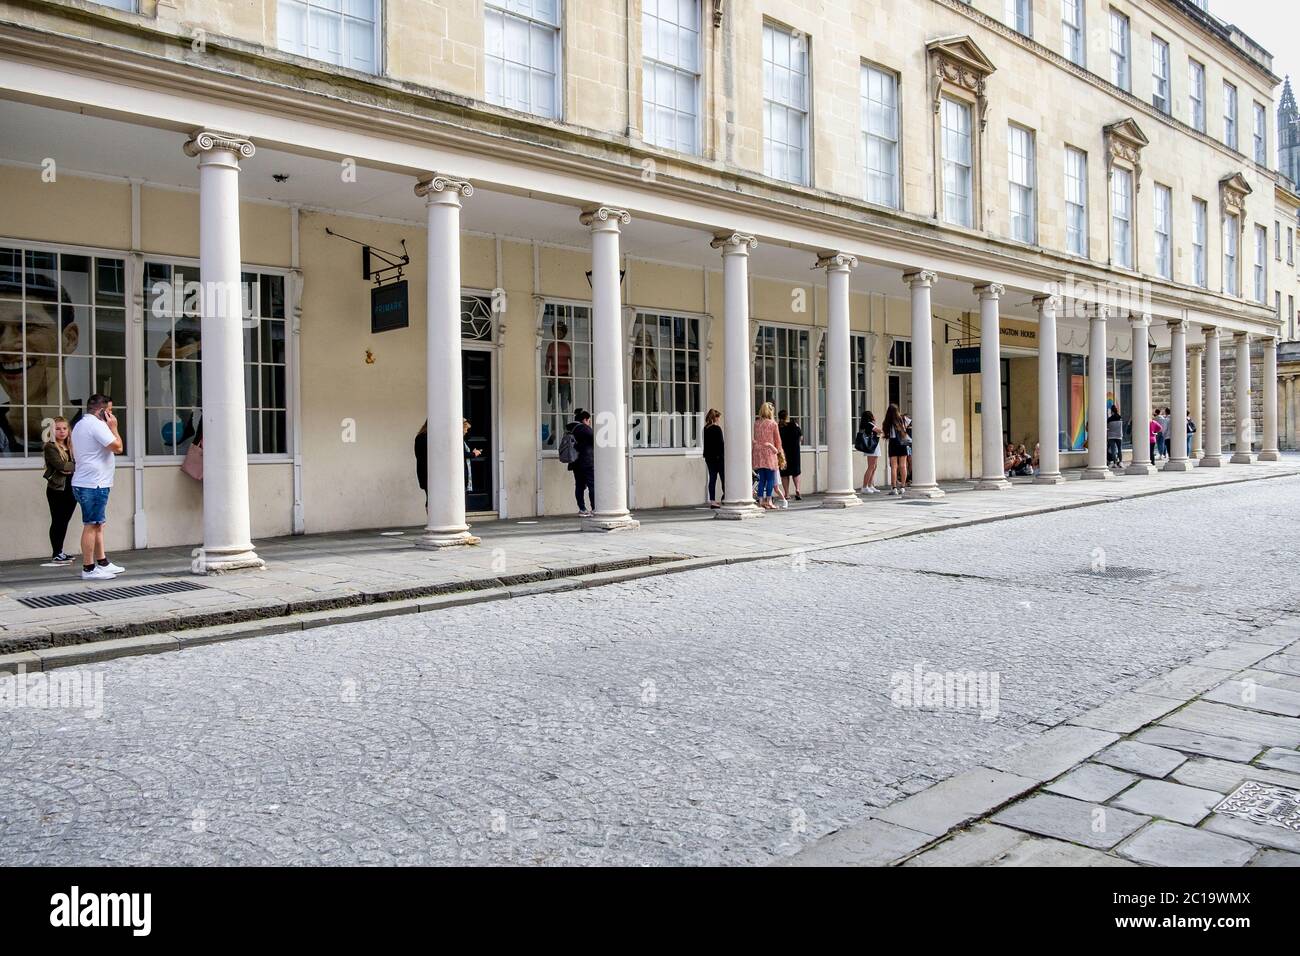 Bath, UK. 15th June, 2020. As non essential shops in England are given the green light by the government to reopen early morning shoppers in Bath waiting for the shops to open are pictured as they queue to get into Primark. Credit: Lynchpics/Alamy Live News Stock Photo